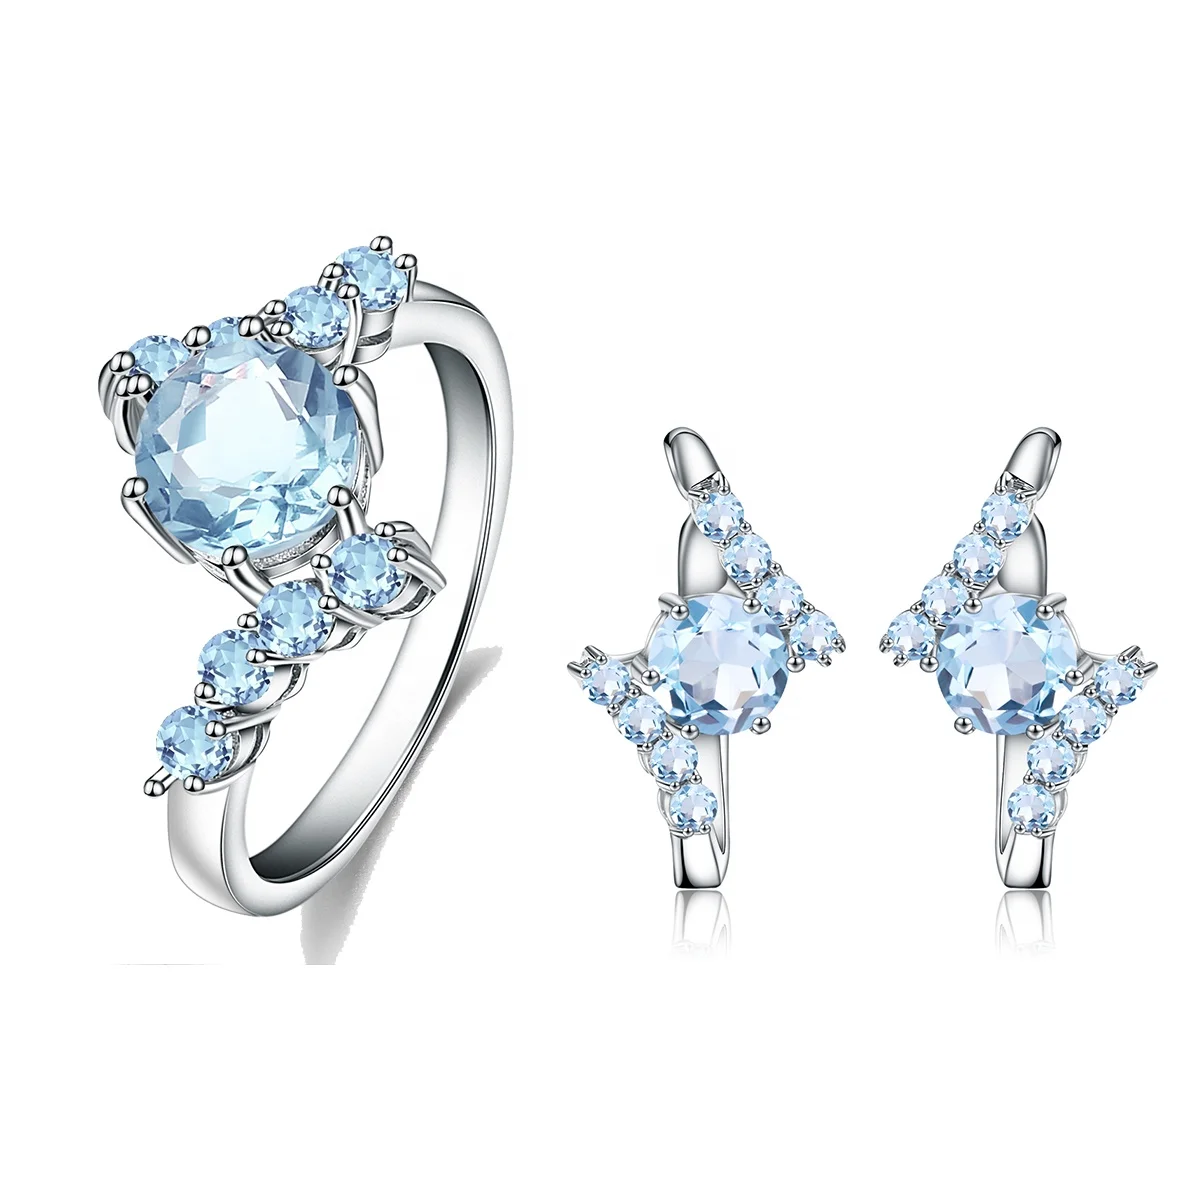 

A2024 Abiding Classic Natural Sky Blue Topaz 925 Sterling Silver Earrings Ring Fine Jewelry Jewelry Sets